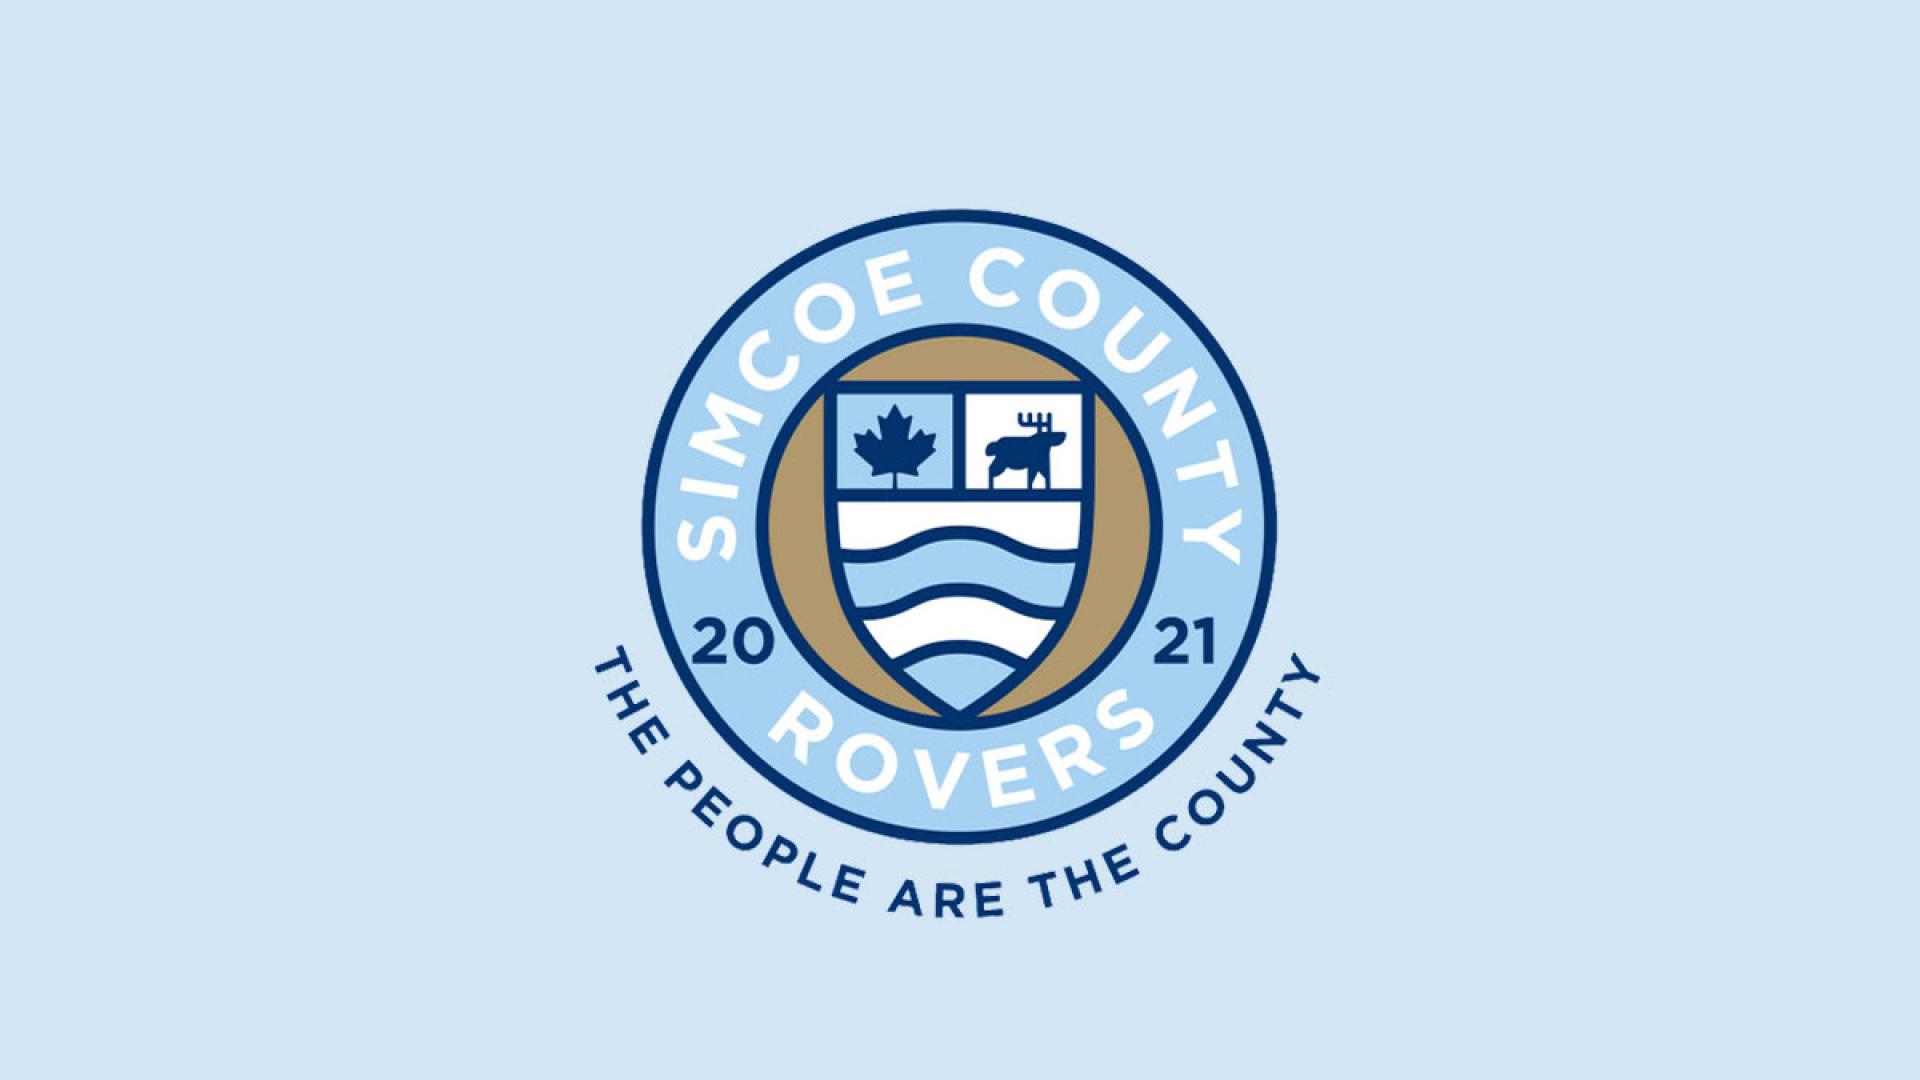 Simcoe County Rovers | 2021| The People are the County